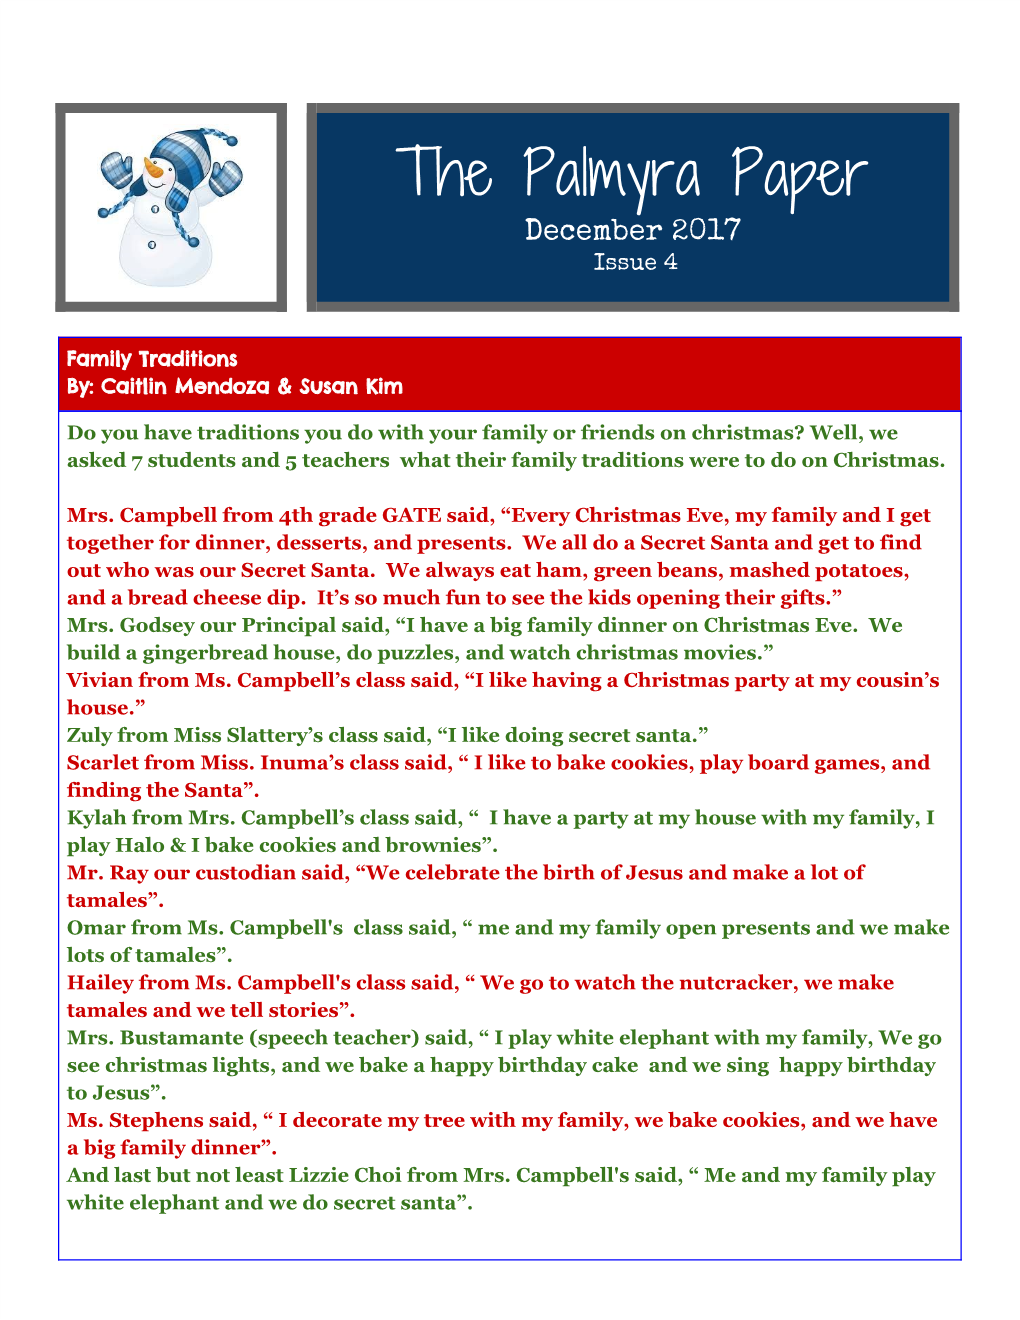 The Palmyra Paper December 2017 Issue 4